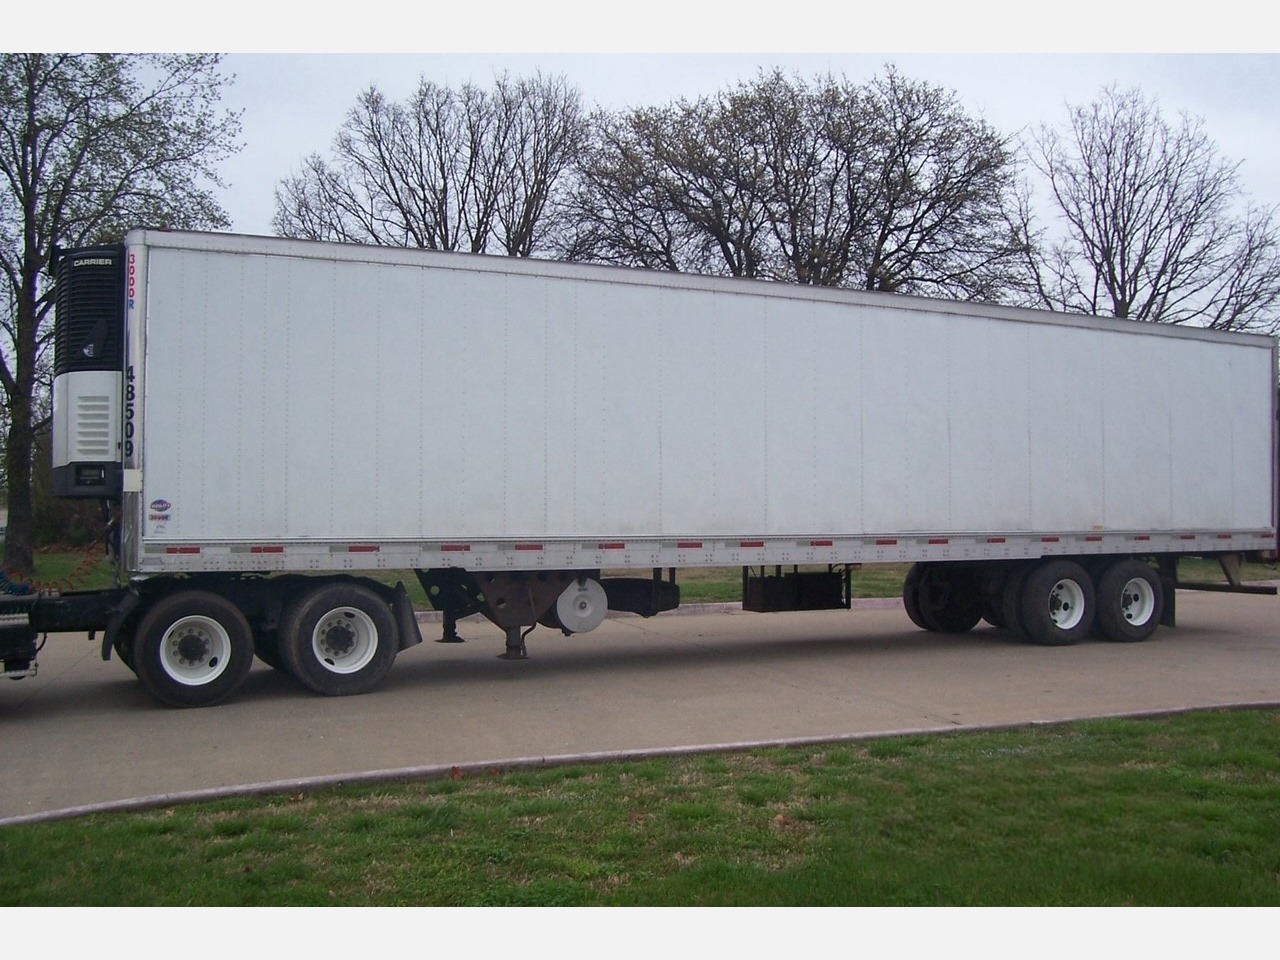 USED 2005 UTILITY 48' ROLL DOORS REEFER TRAILER #16444